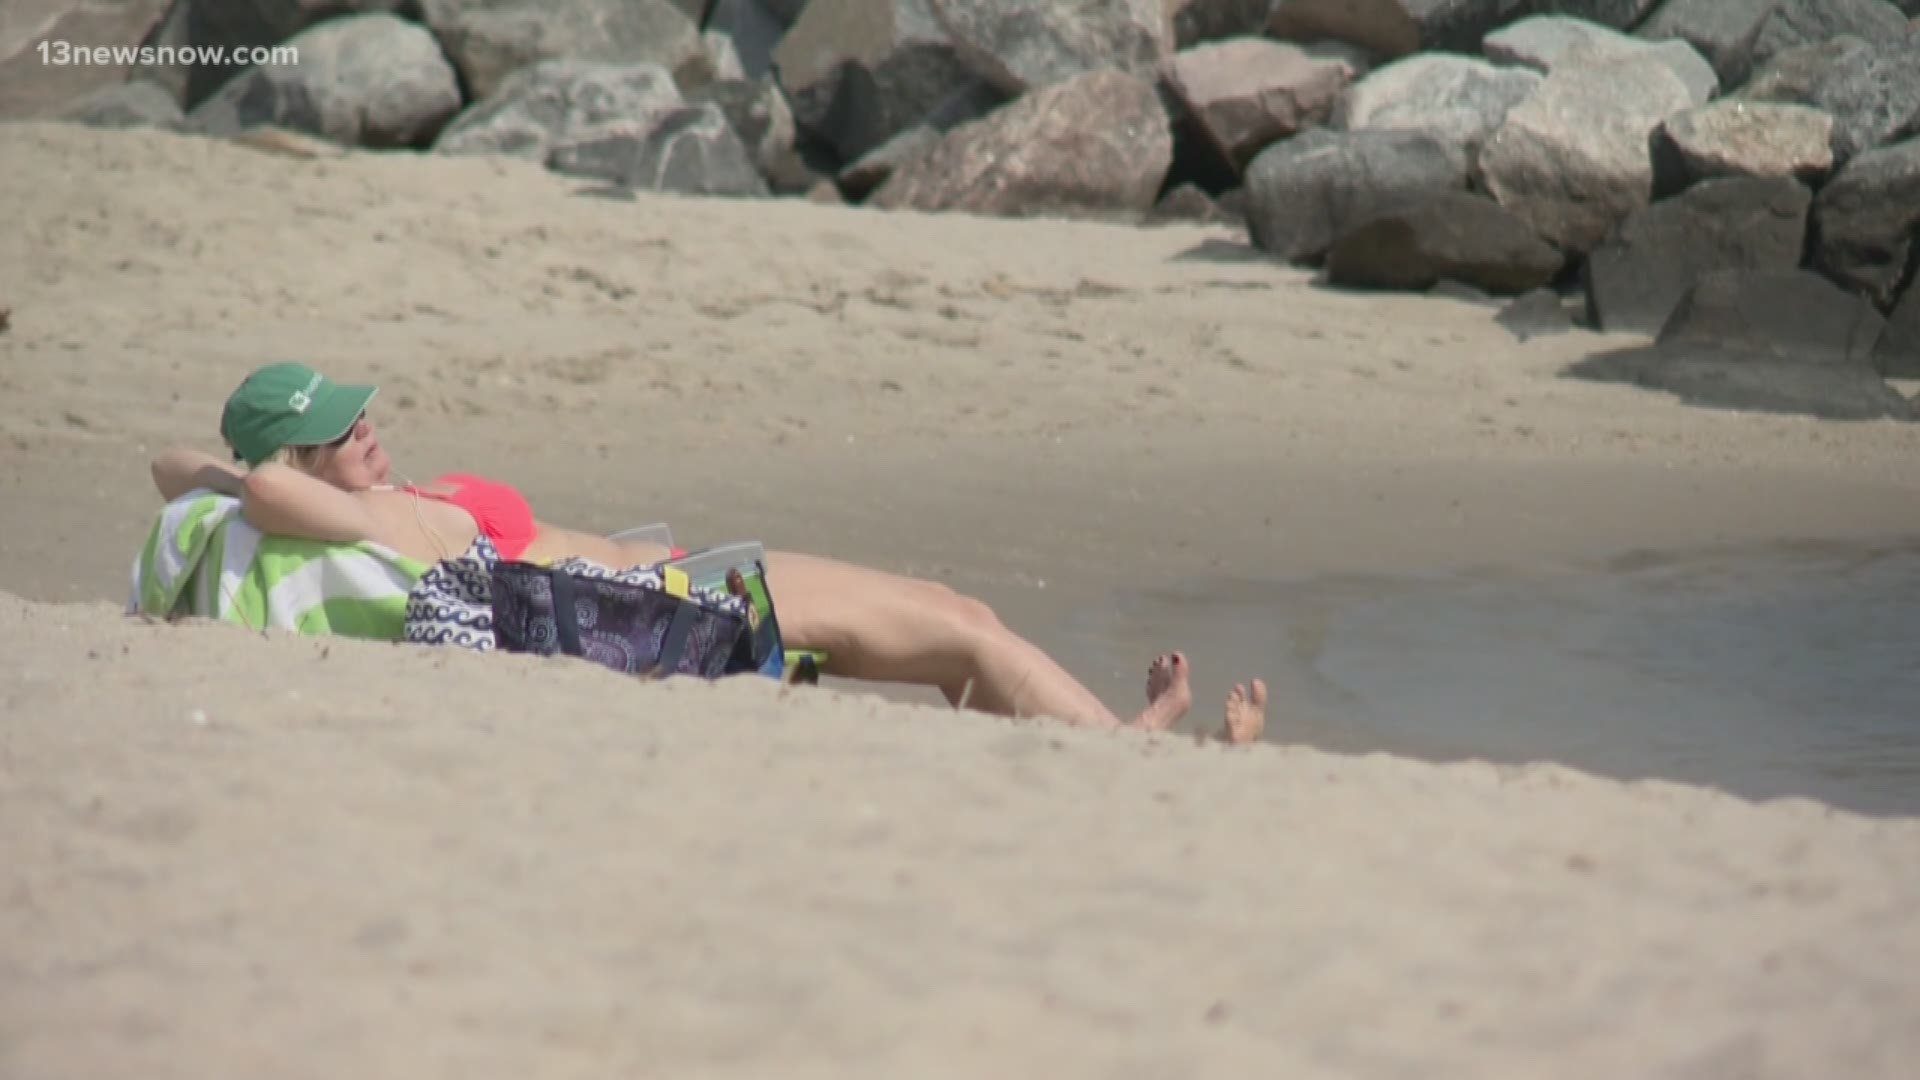 In Yorktown, hundreds of people hit the beach, despite COVID- 19 concerns. But is it safe?